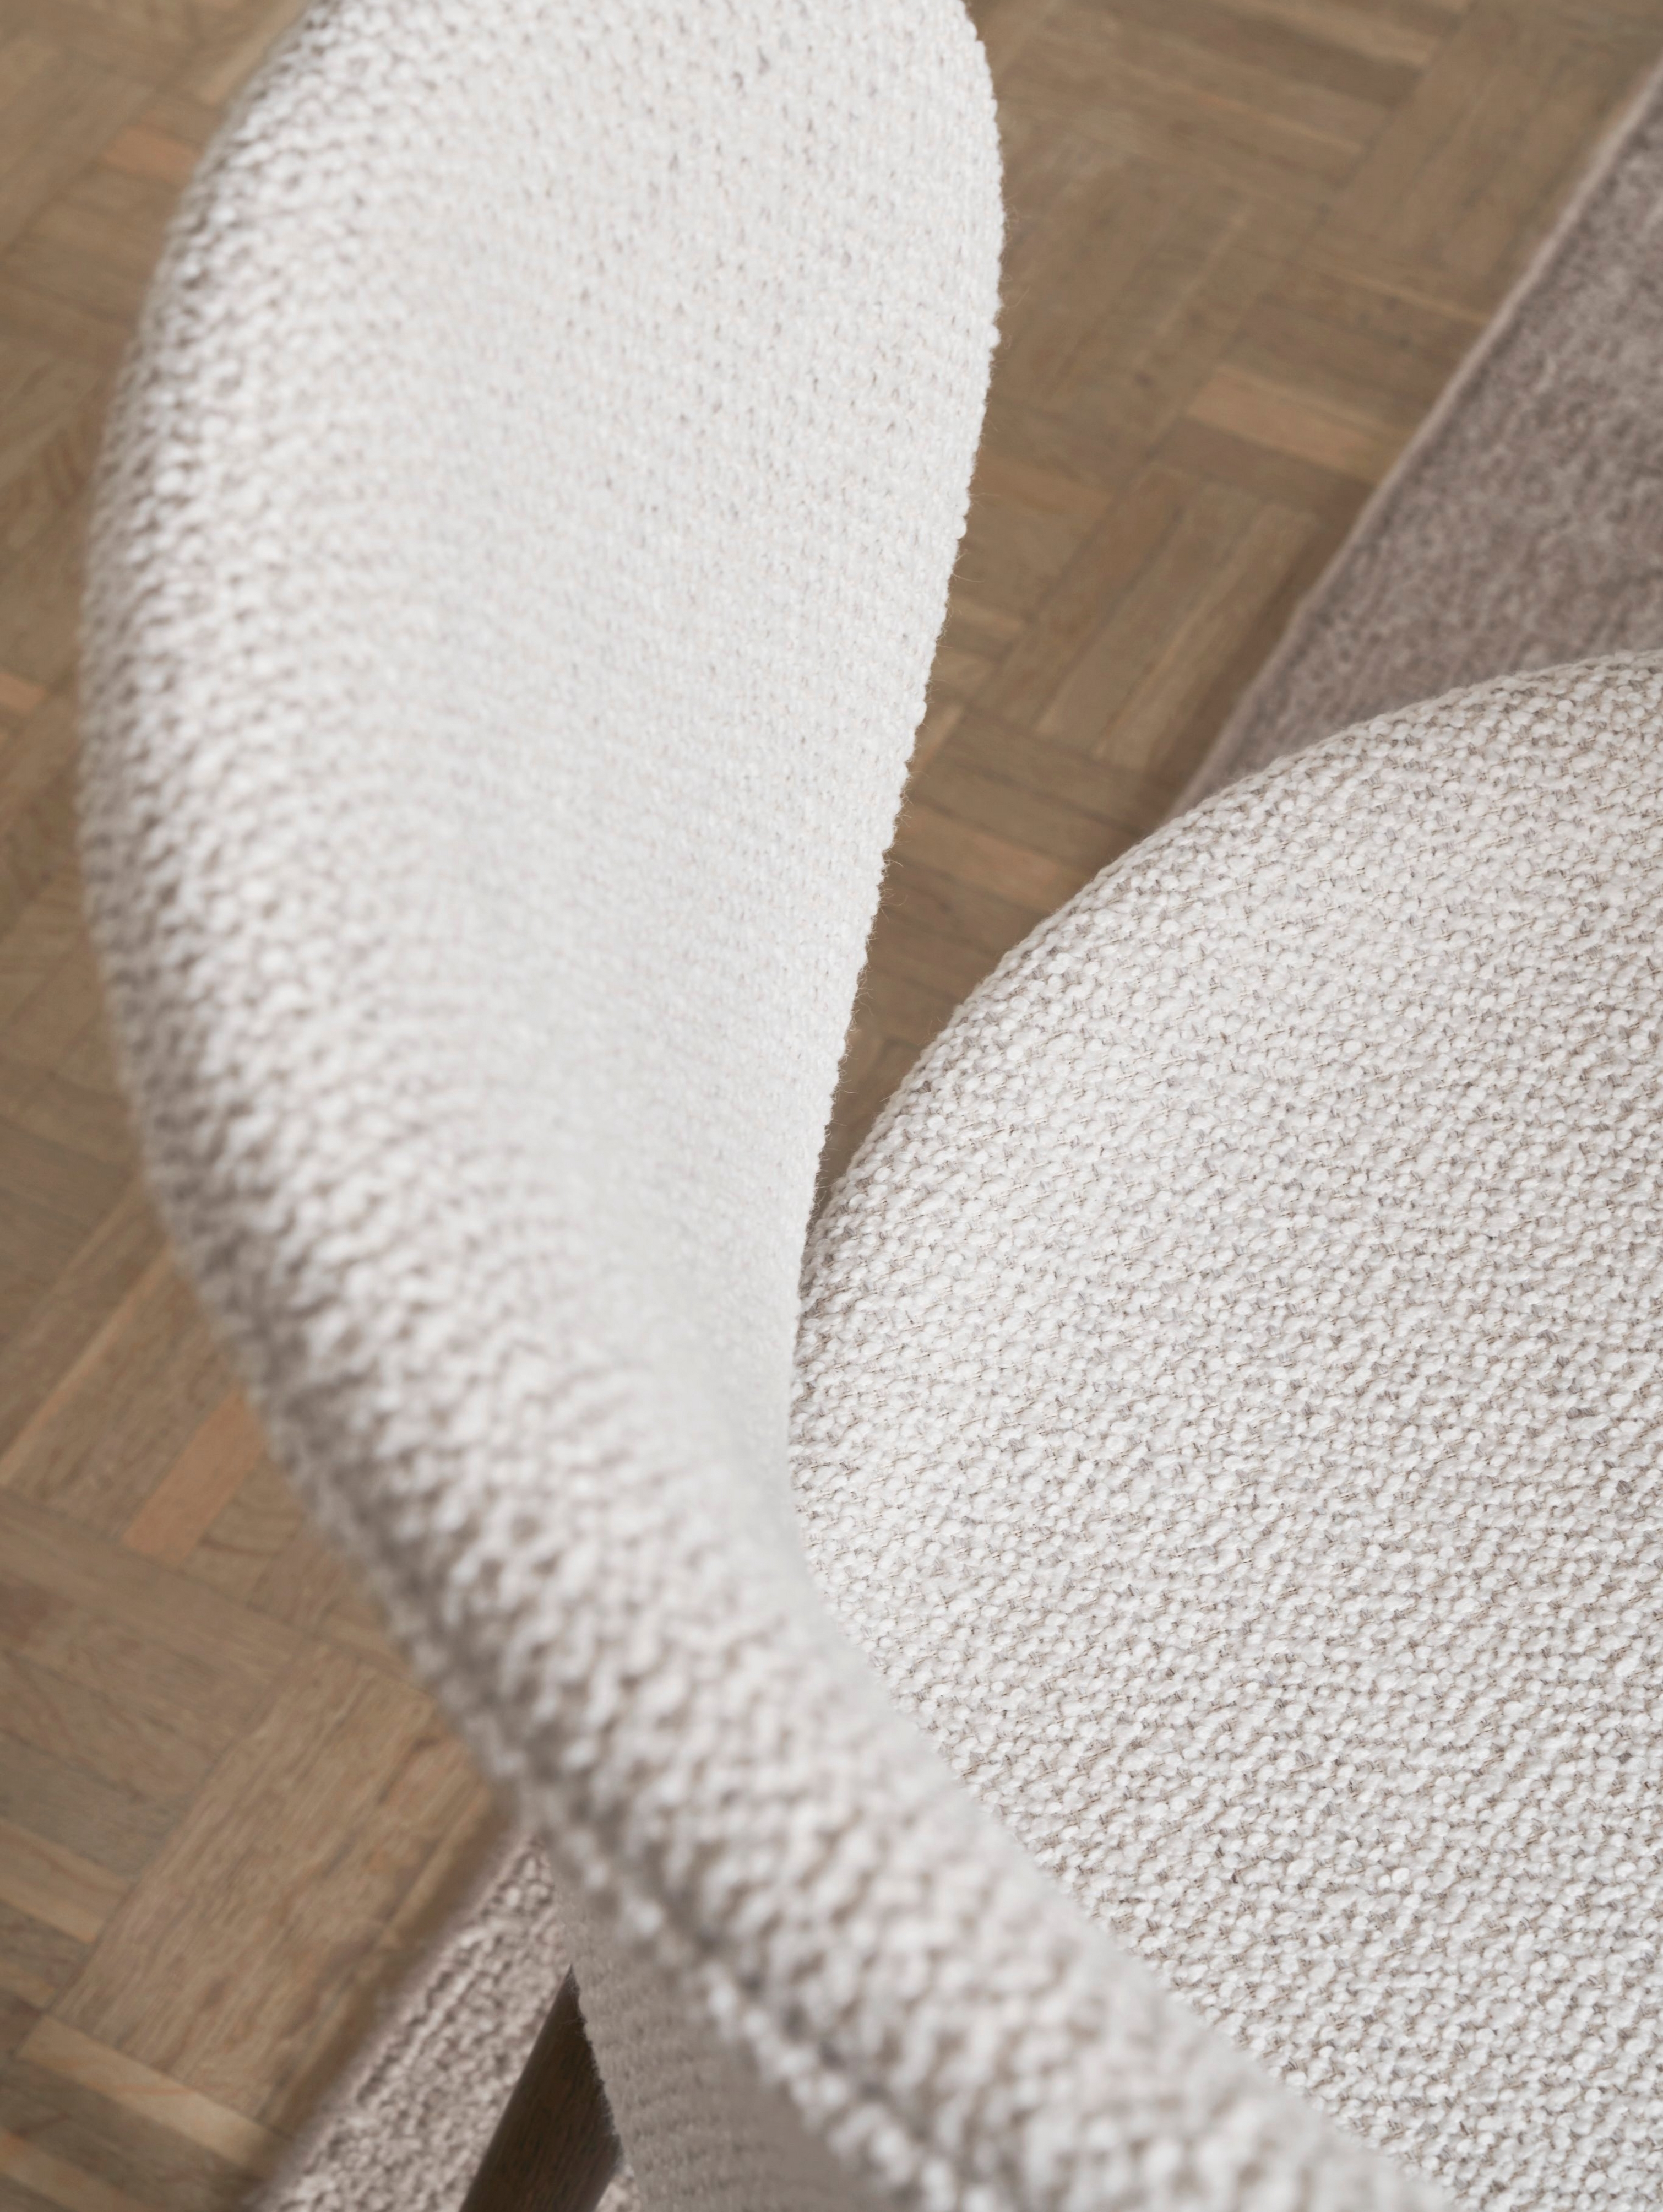 A close-up view of the Hamilton chair upholstered in white Lazio fabric